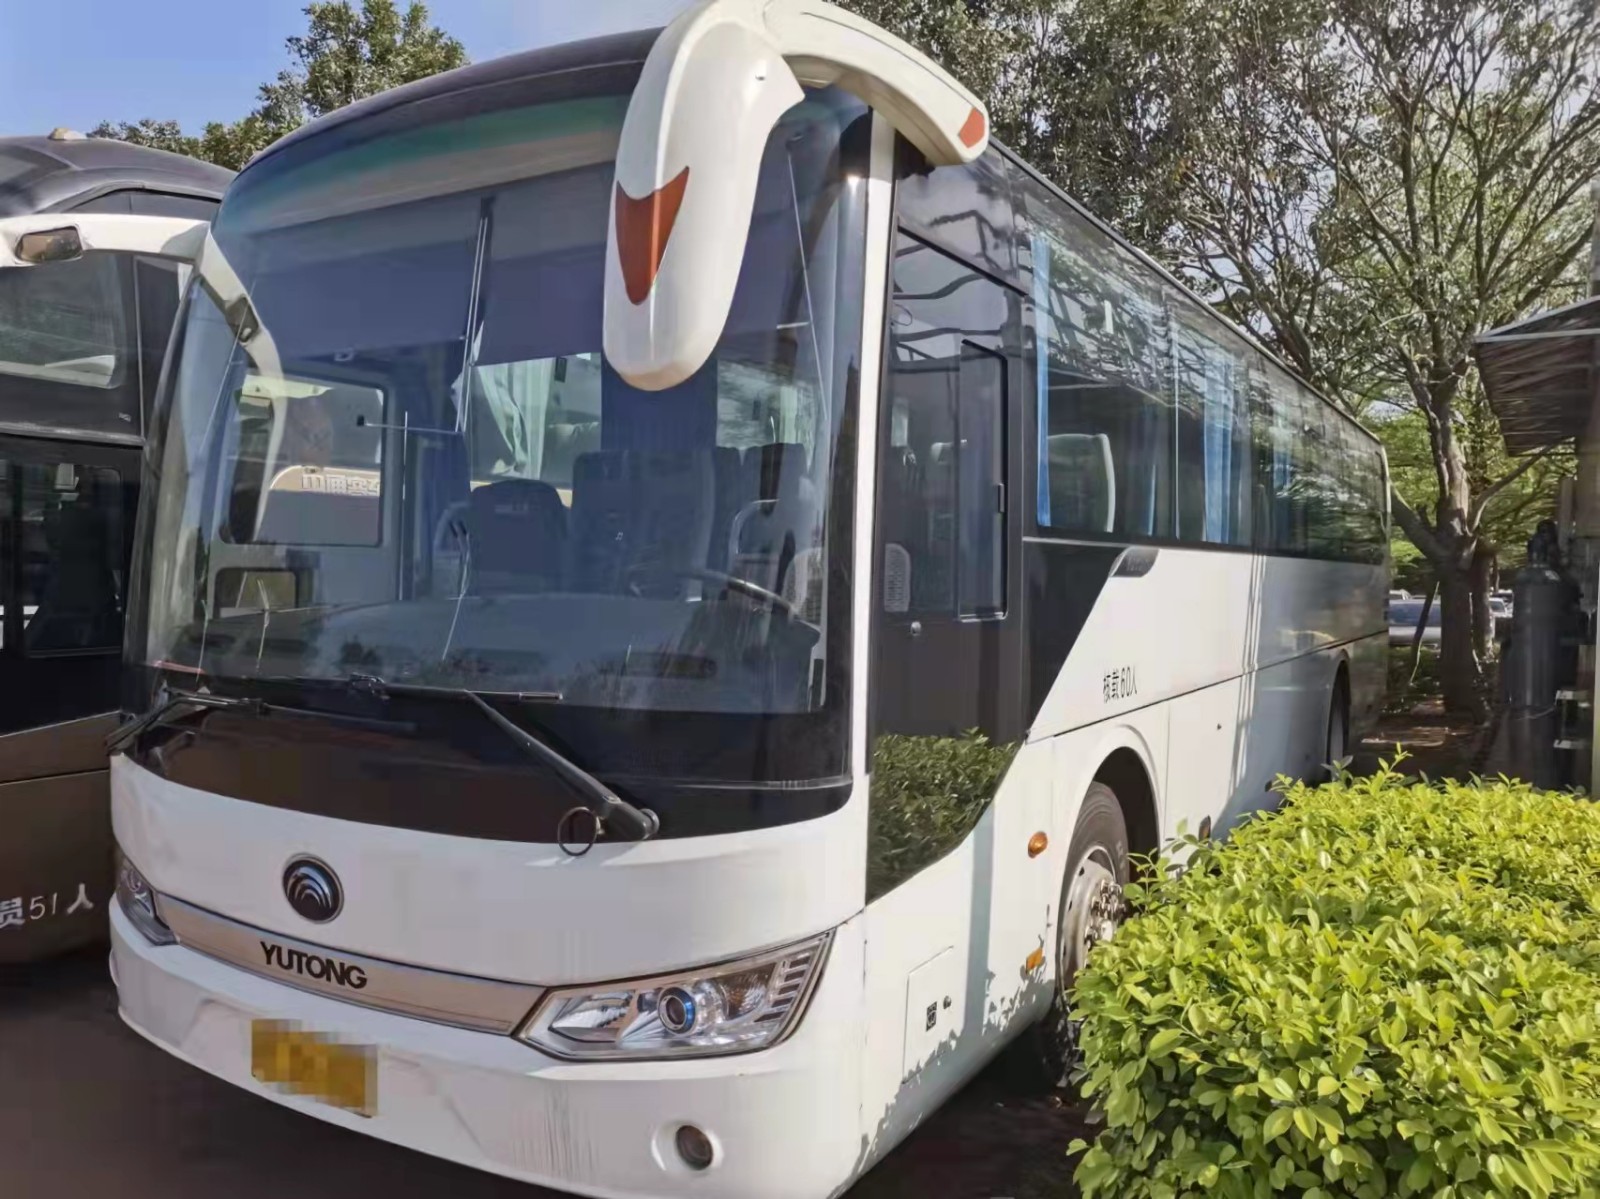 Used Yutong Urban Buses Used Diesel LHD Coach Buses Made In China Luxury Urban Passengers Coach Buses